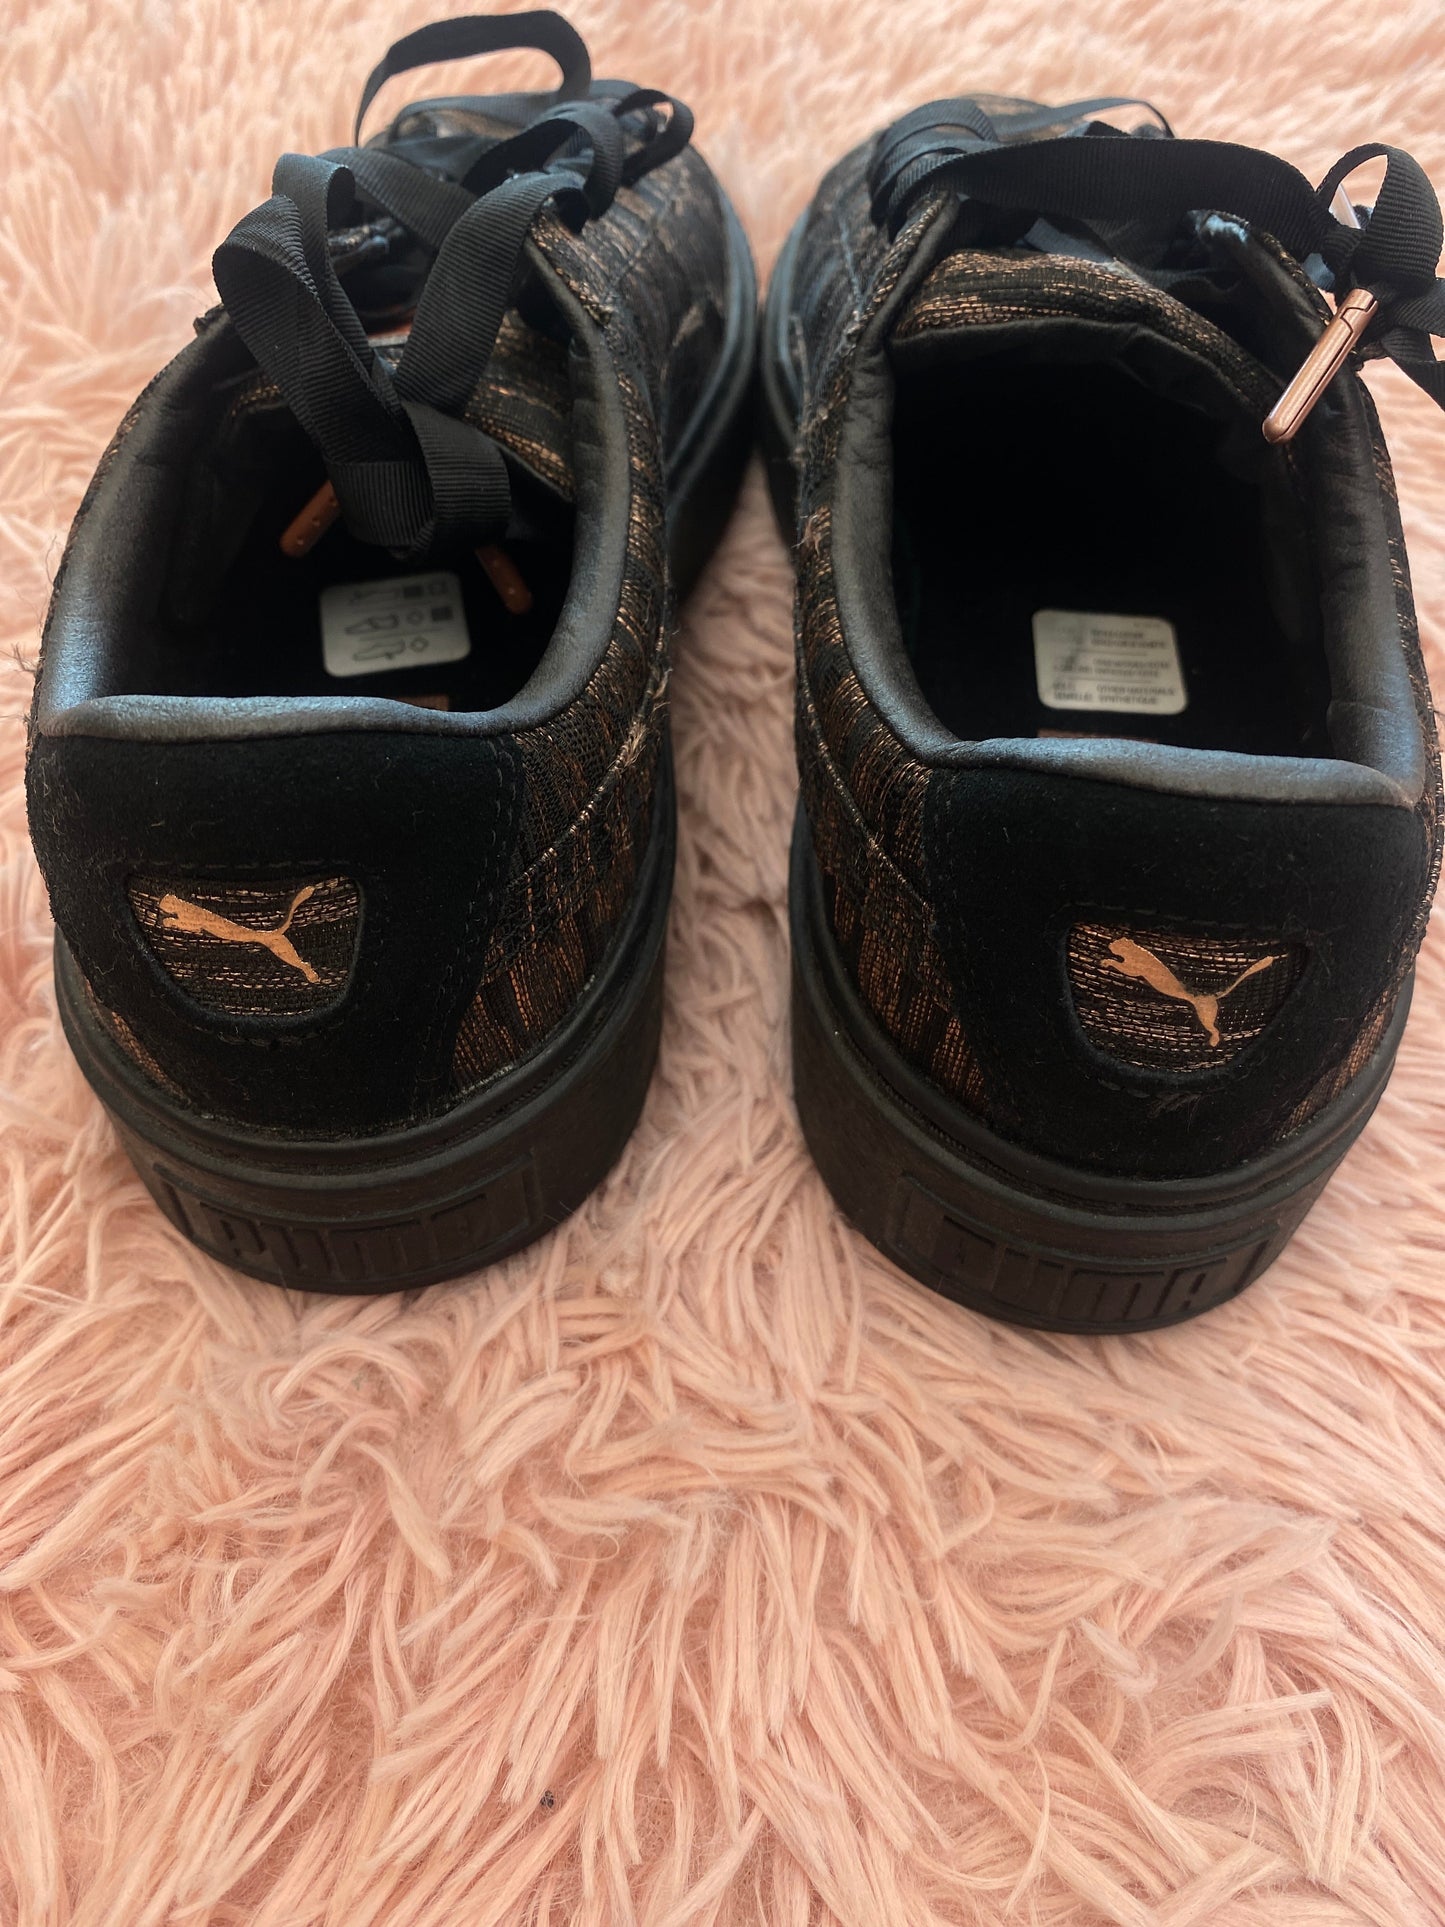 Black Gold Shoes Sneakers Puma, Size 9.5